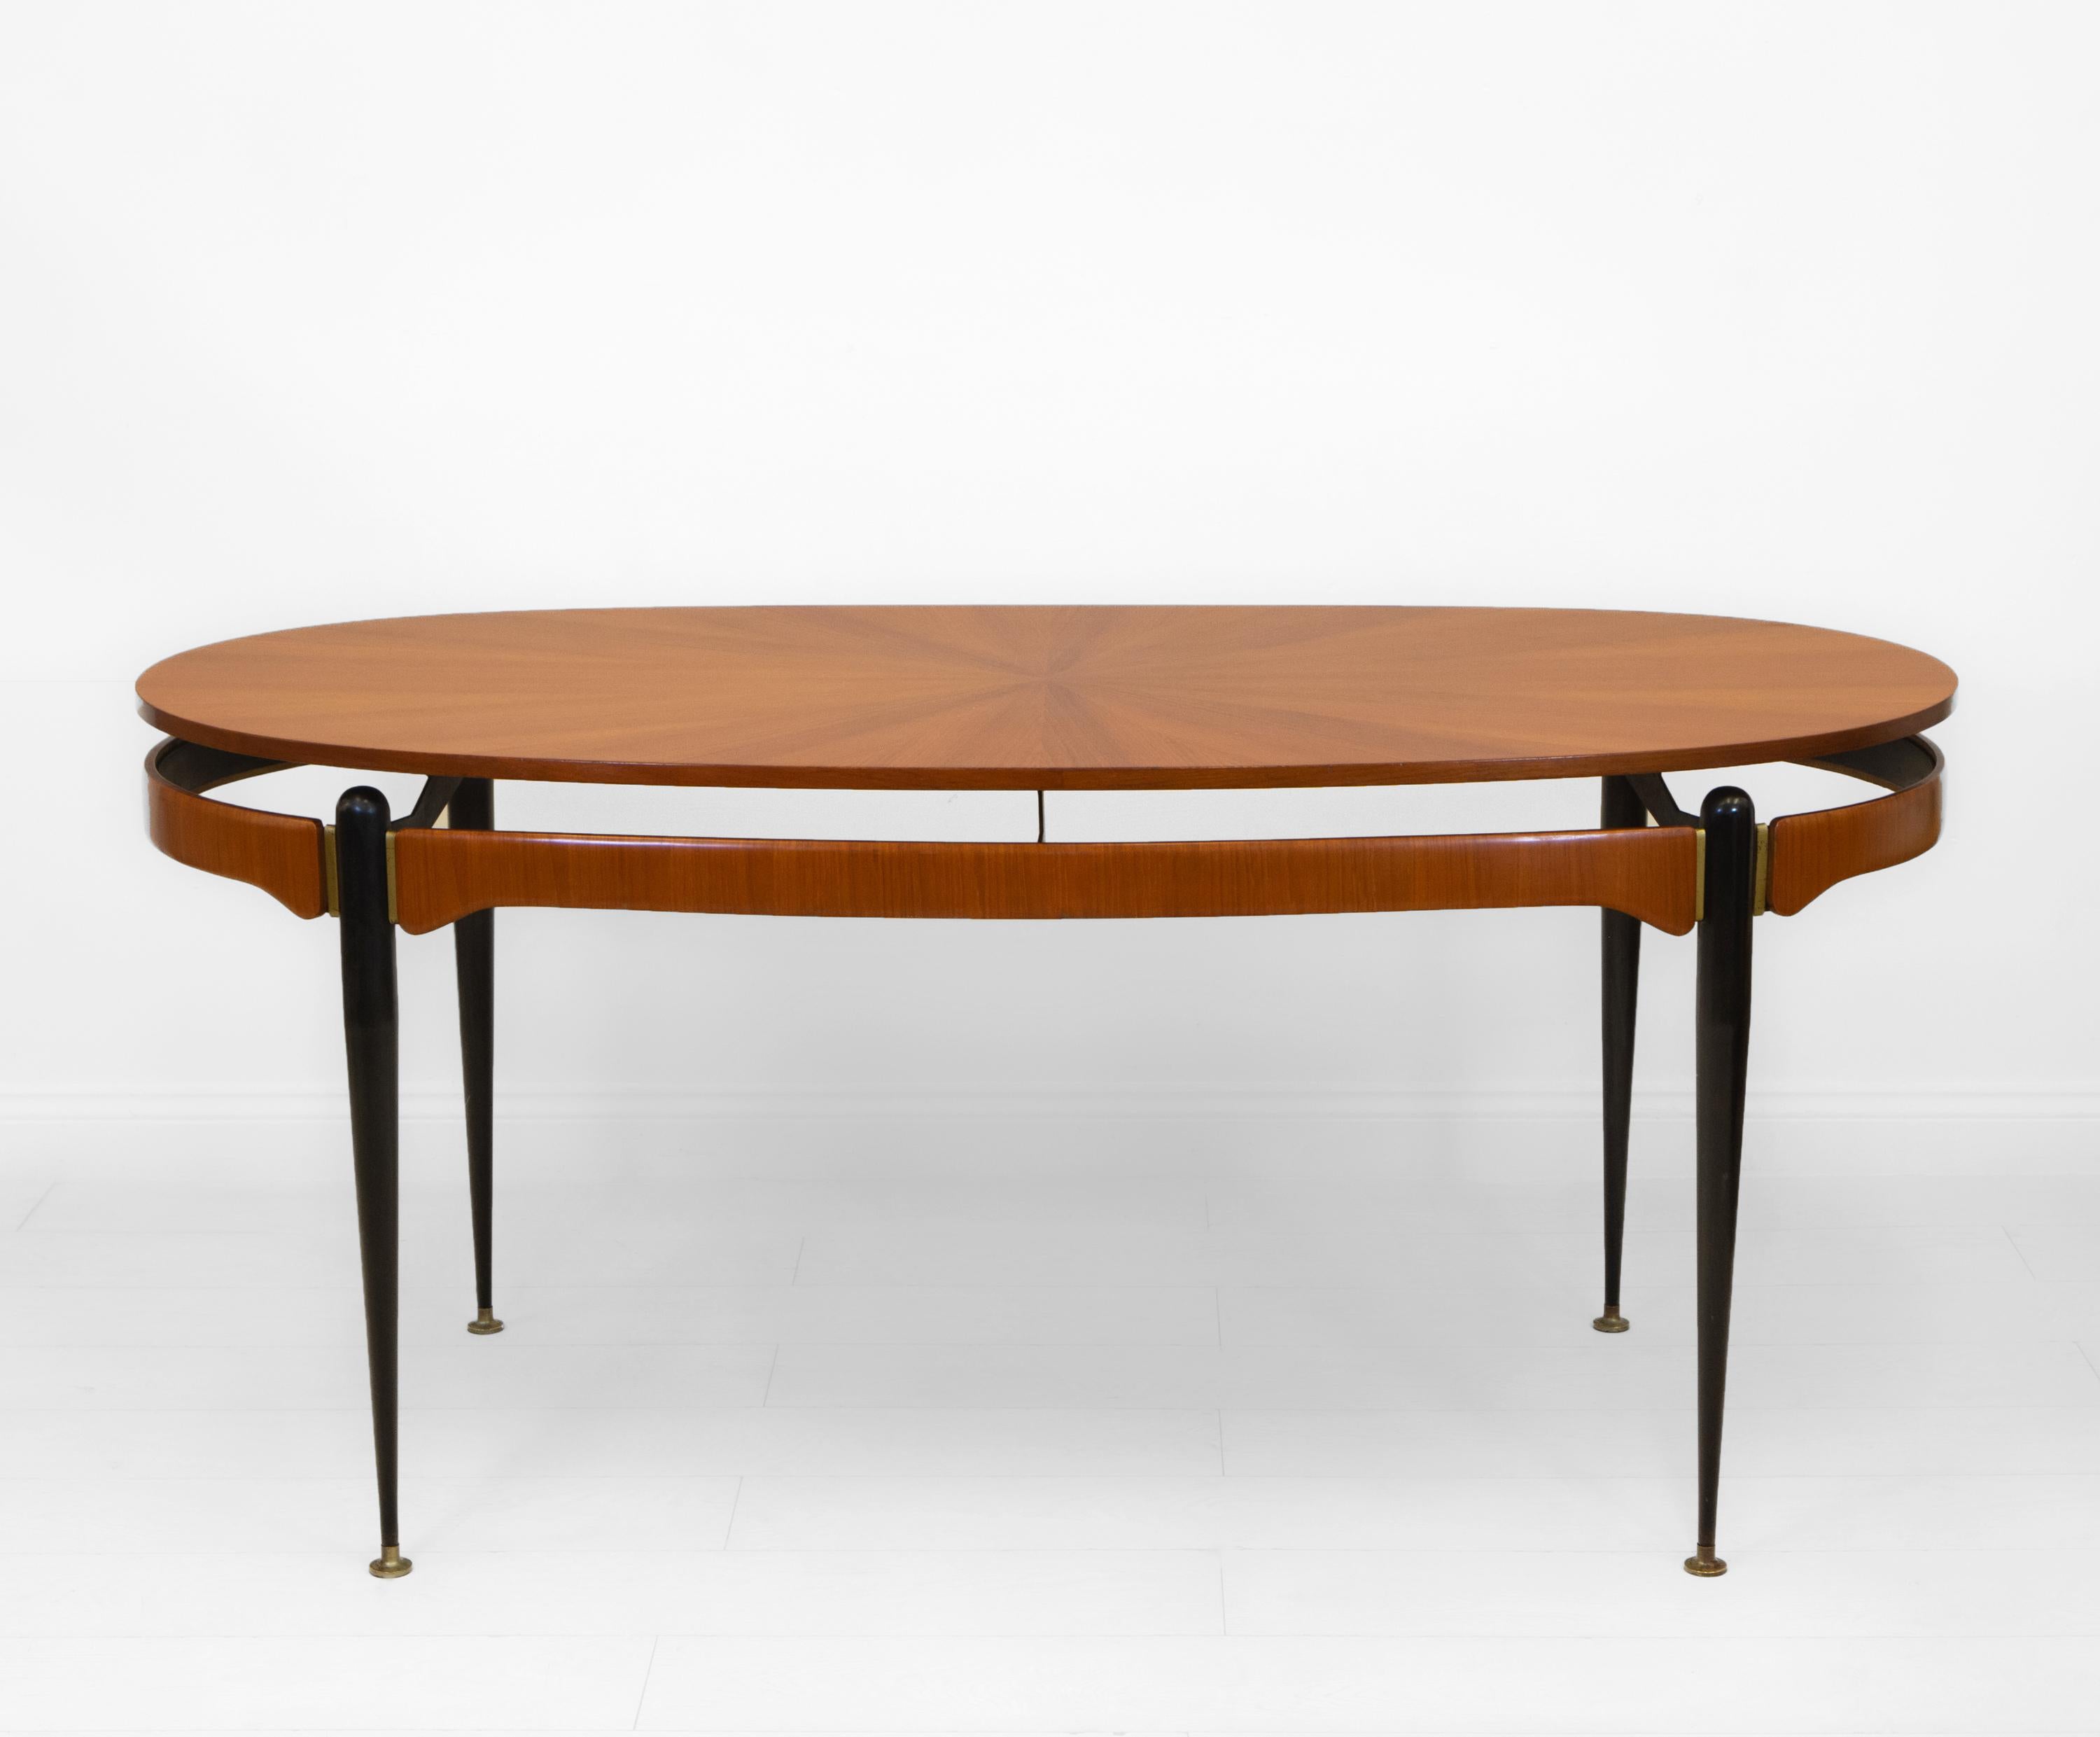 An elegant mid-century Italian oval dining table, attributed to Silvio Cavatorta. Circa 1950.

The fabulous sunburst teak veneer top is a nice, well made example. The clever 'floating' top hovers above an open teak rounded form frieze, giving a